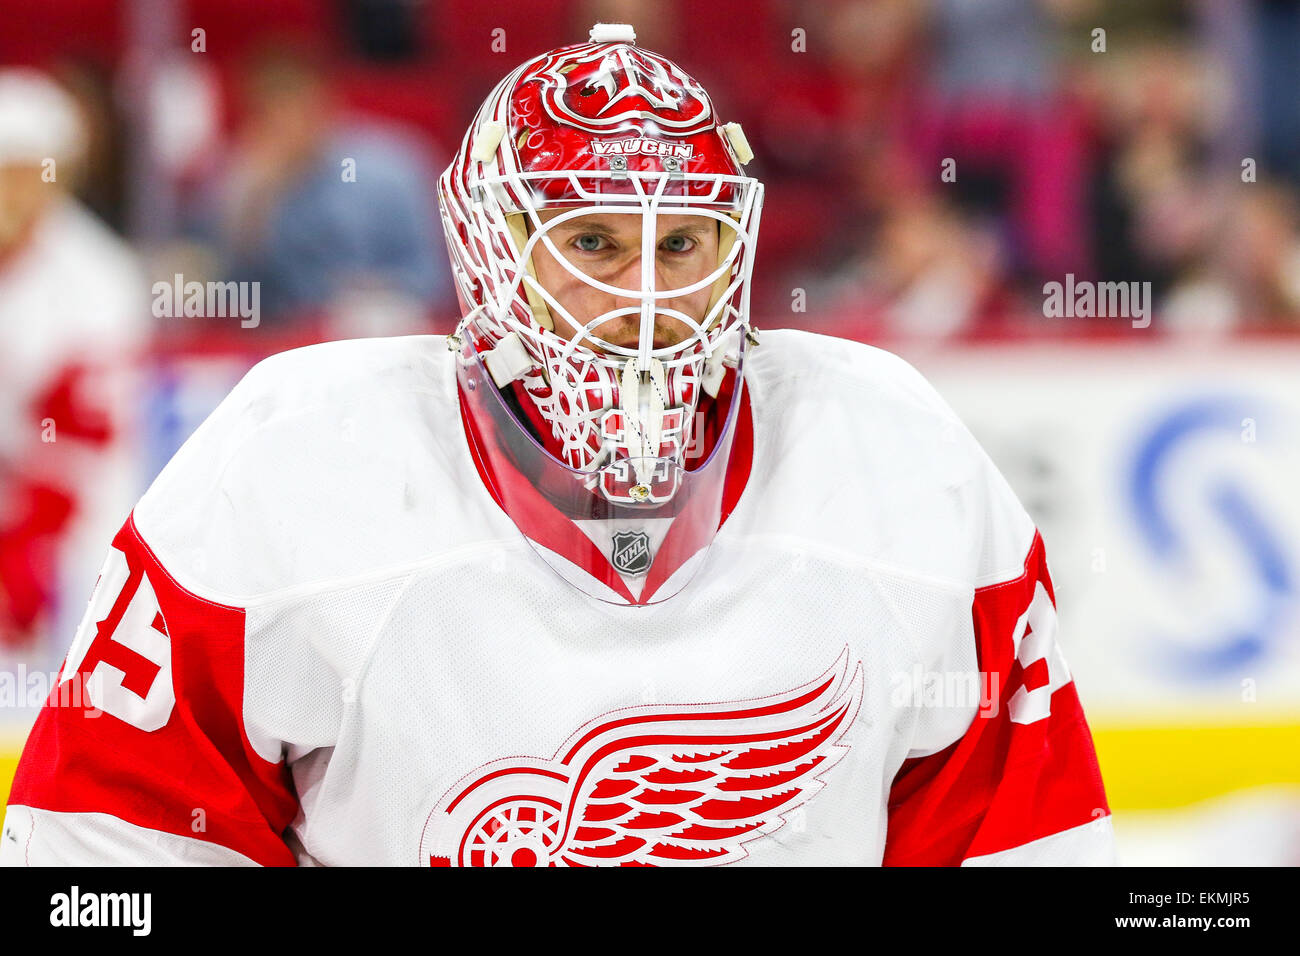 Detroit Red Wings goalie Jimmy Howard (35) during the NHL game between the Detroit Red Wings and the Carolina Hurricanes at the PNC Arena. The Red Wings defeated the Carolina Hurricanes 2-0. Stock Photo